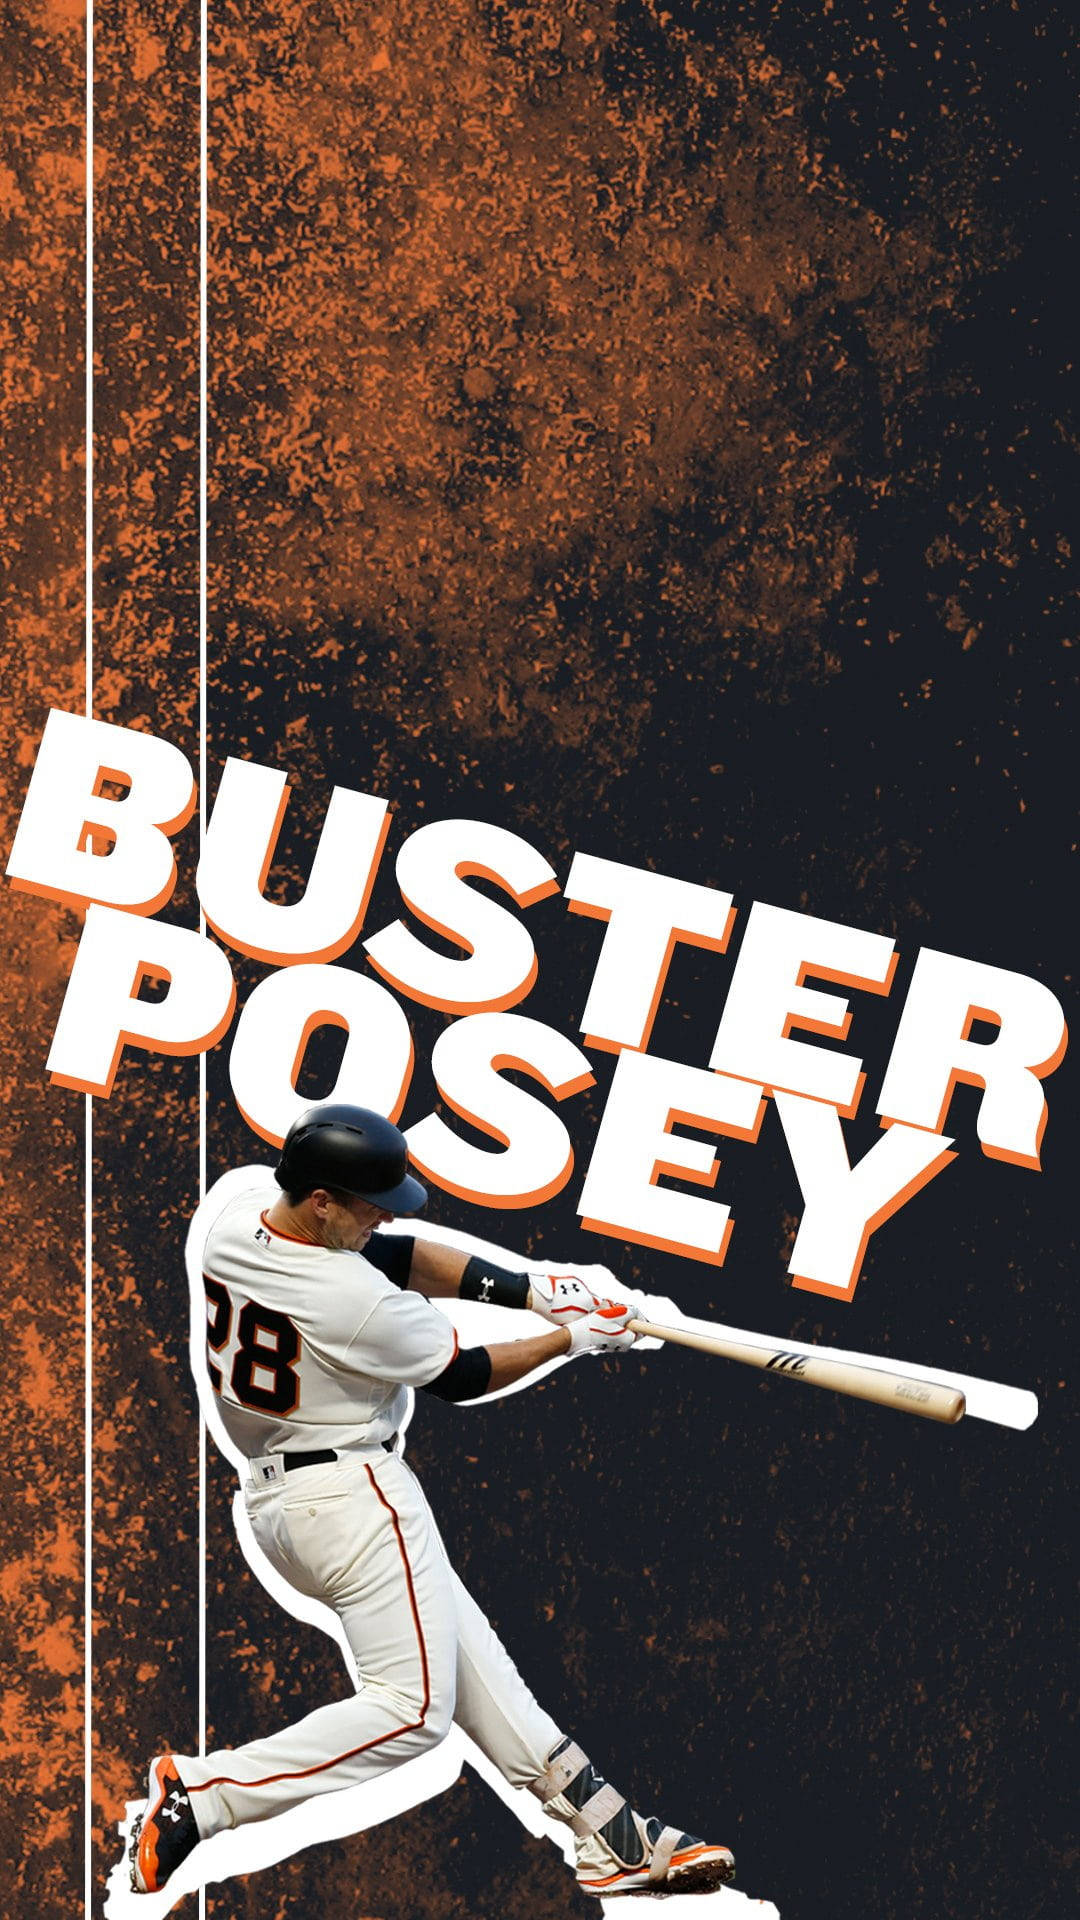 Buster Posey Extreme Background